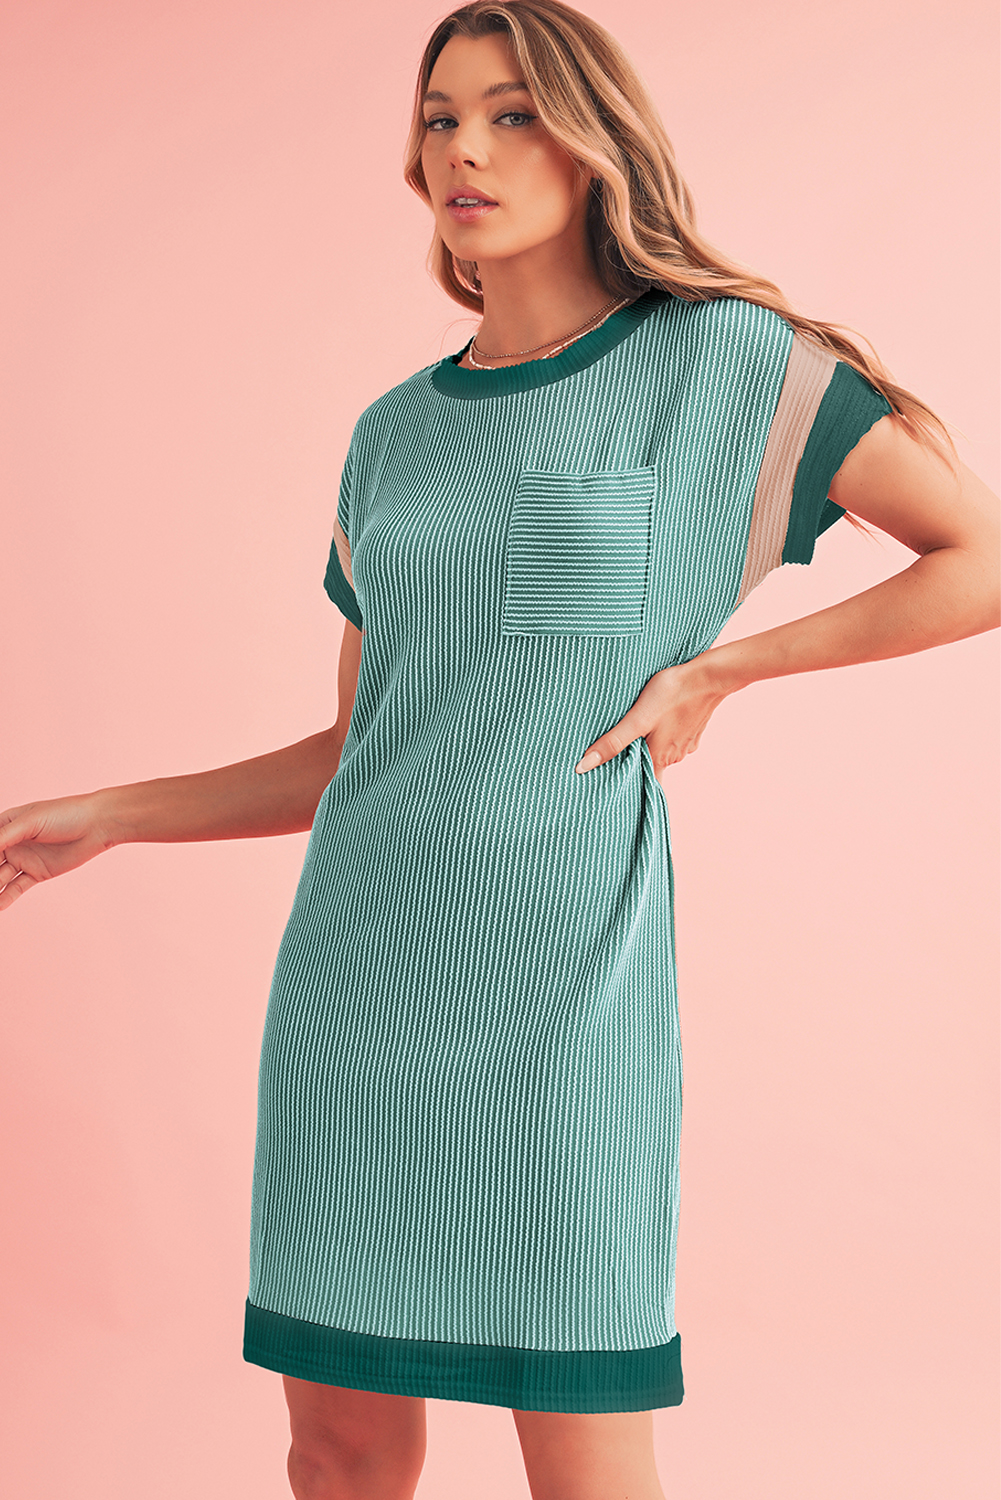 Shewin Wholesale Cheap Moonlight Jade Ribbed Colorblock Patched Pocket T SHIRT Dress